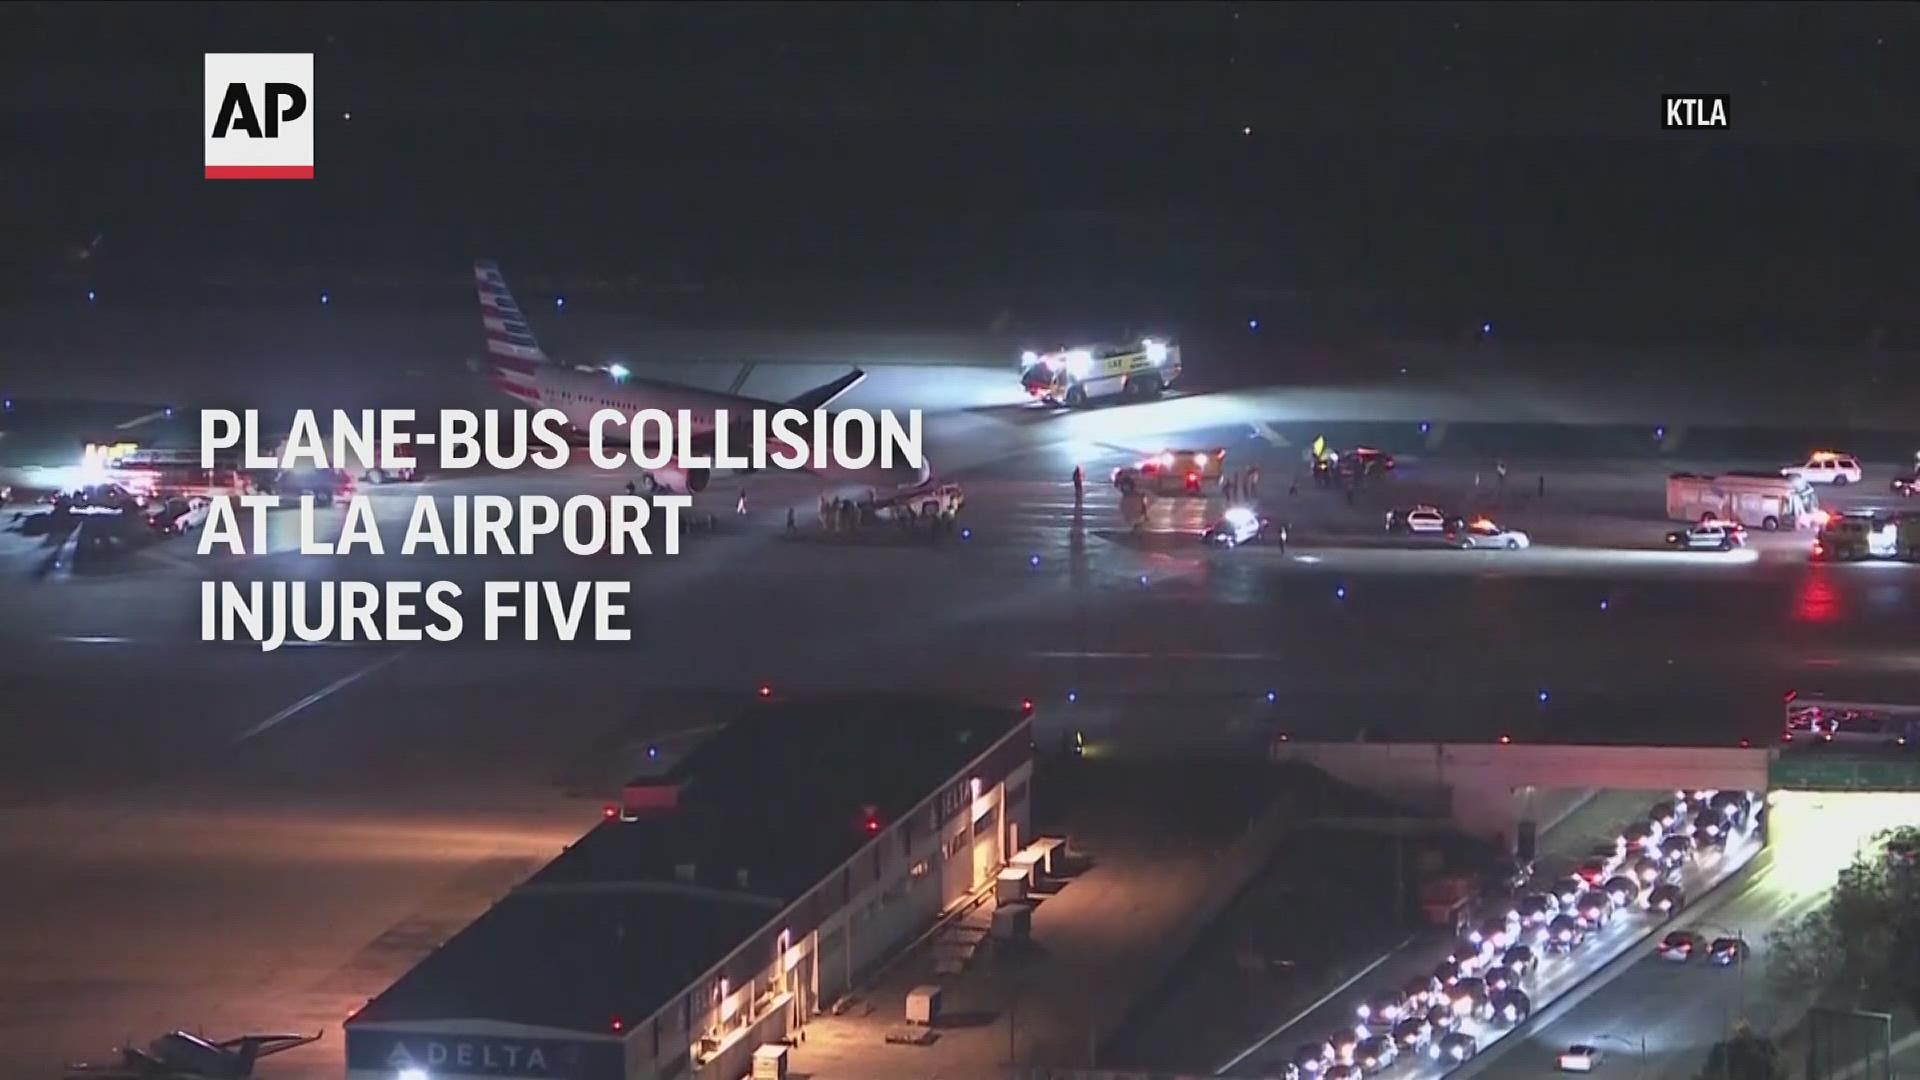 The jet was being towed on a taxiway when it collided with a shuttle bus, which was carrying passengers between terminals.